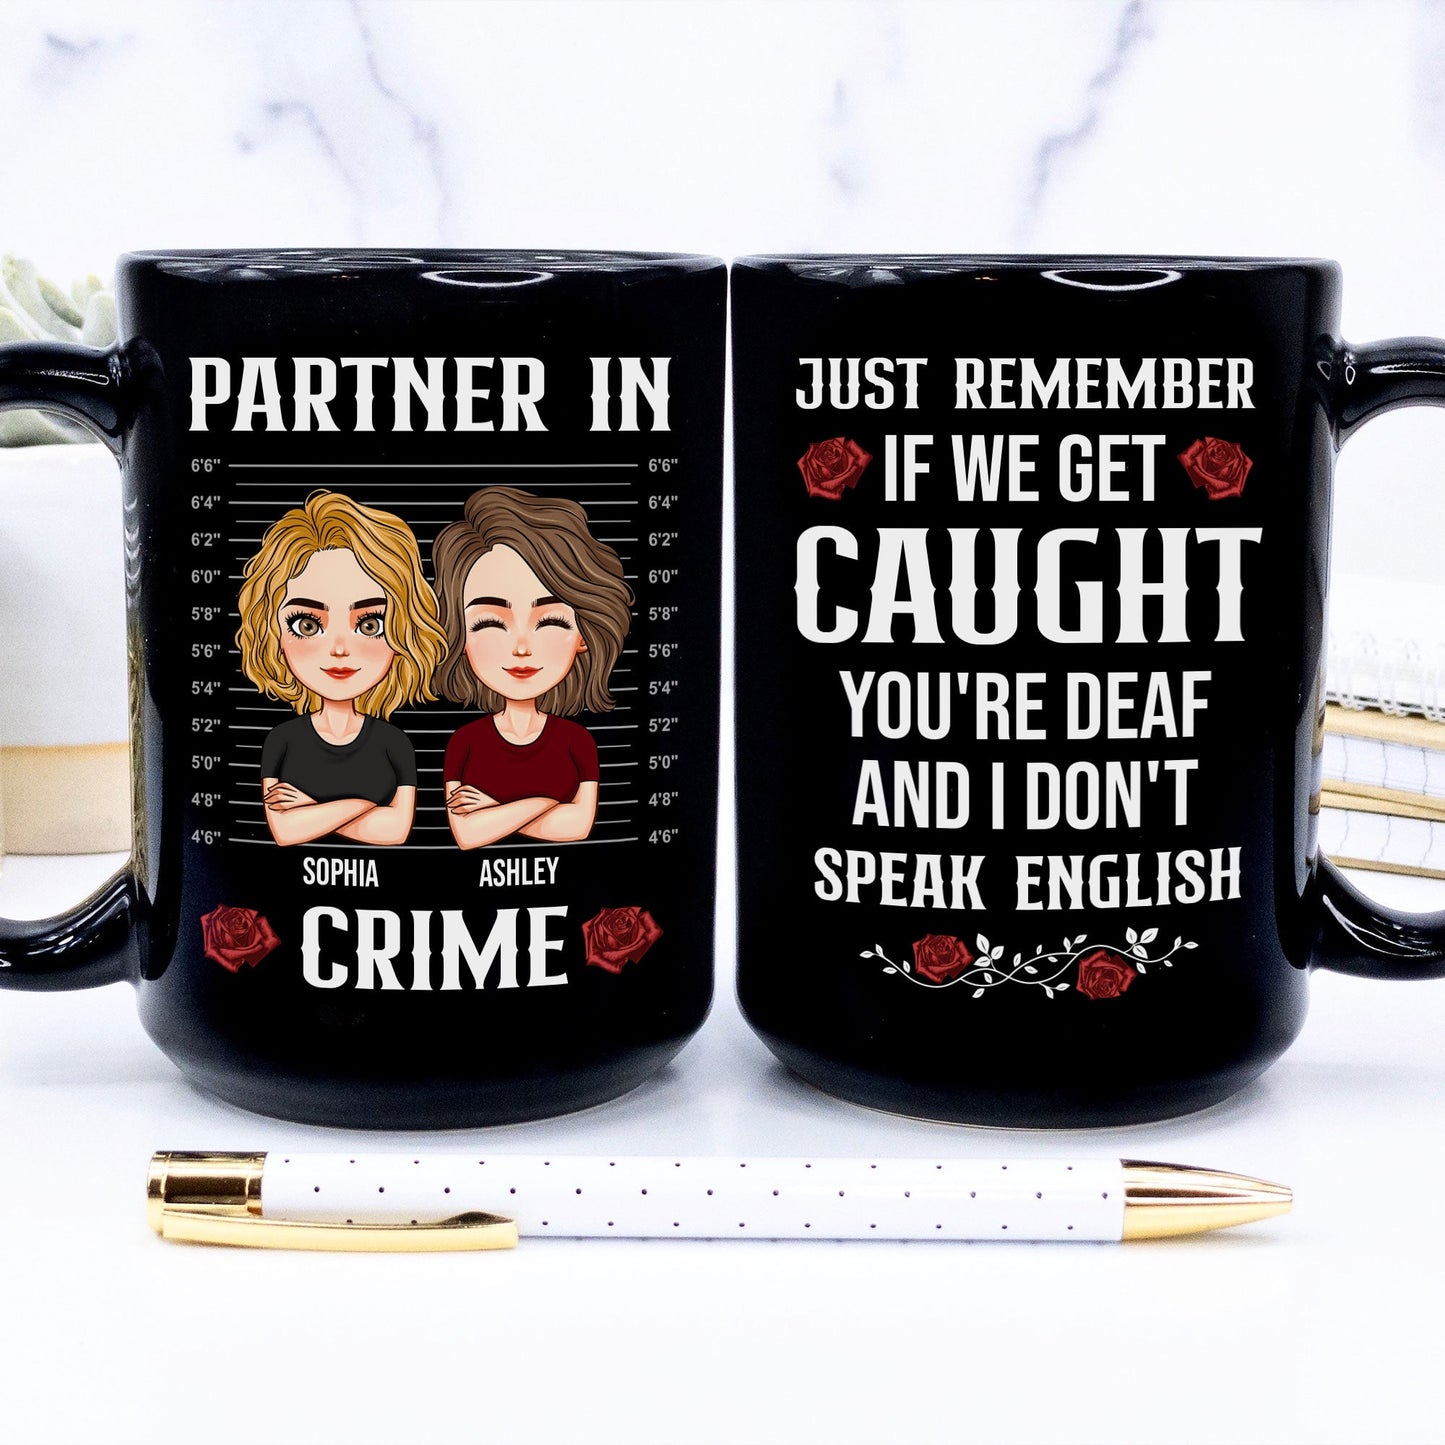 If We Get Caught You're Deaf And I Don't Speak English - Personalized Mug